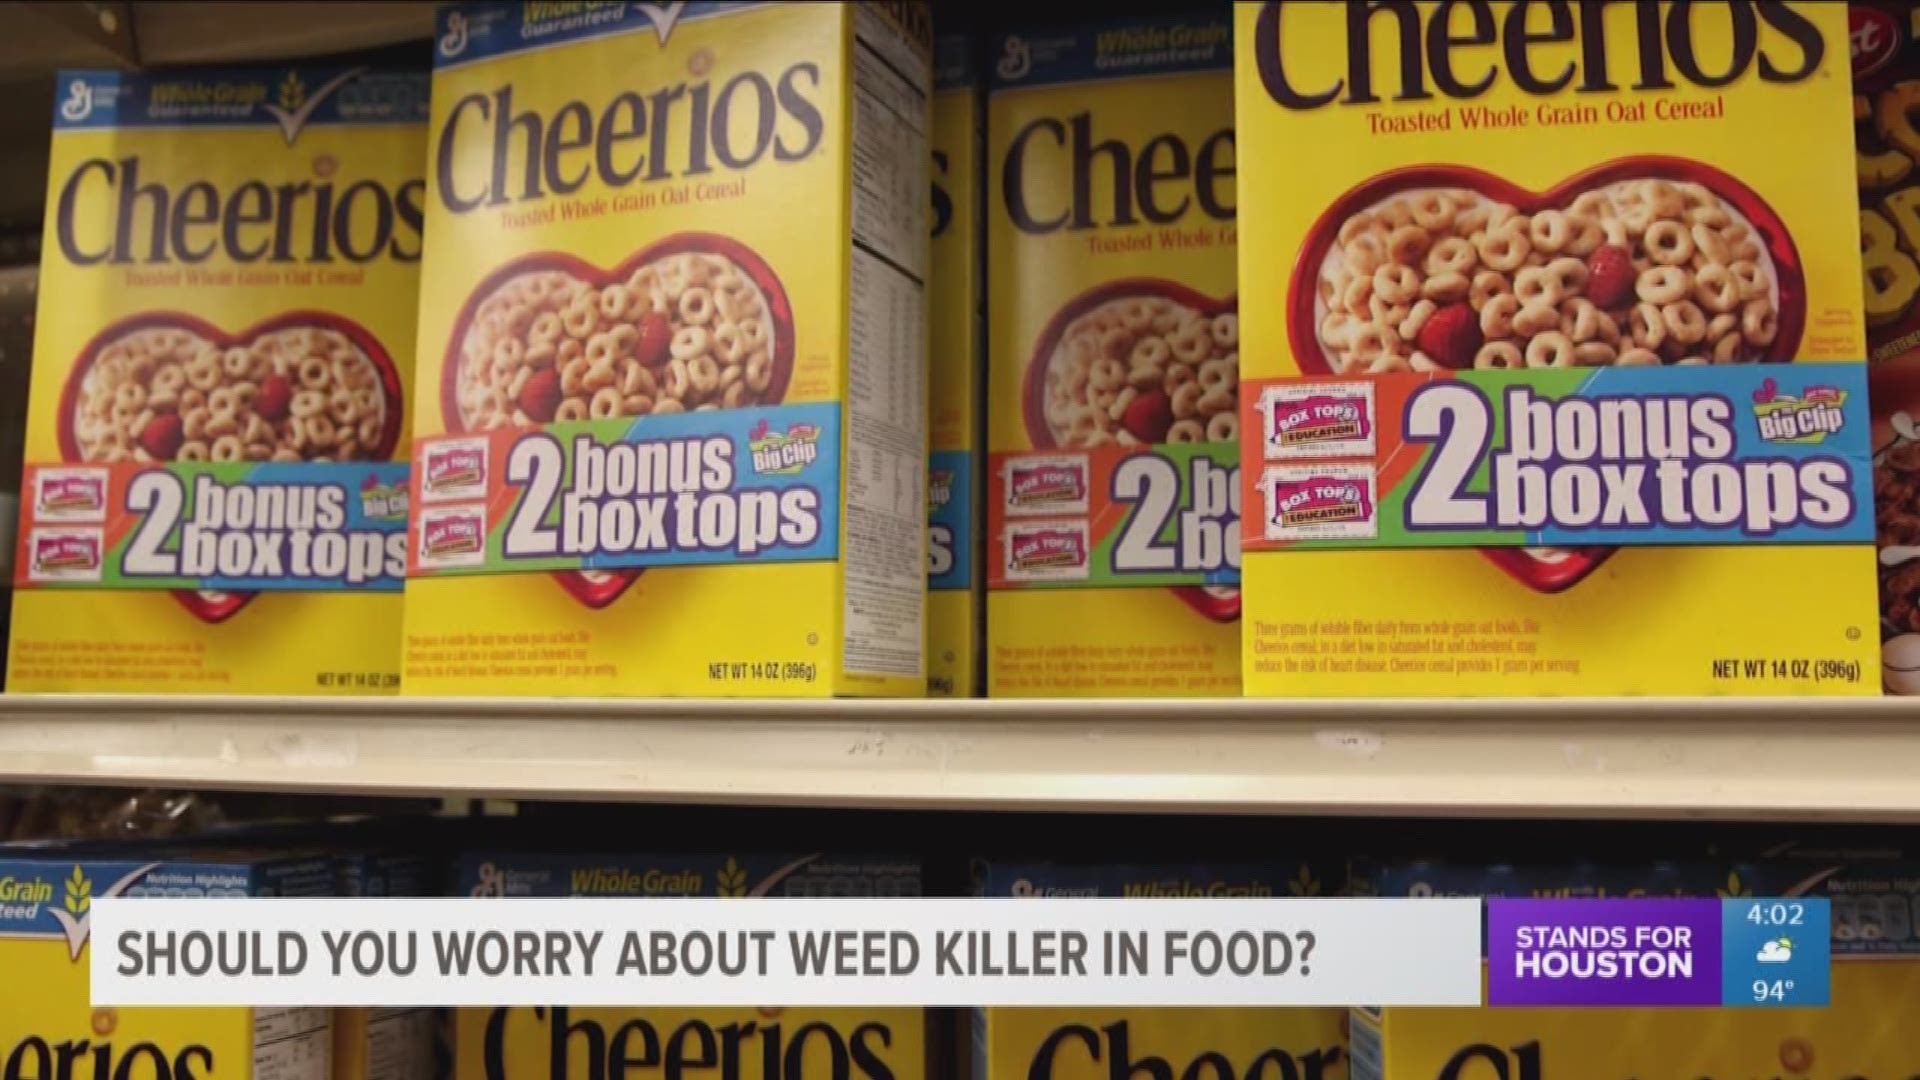 KHOU 11 spoke with experts on a recent study that found a weed-killing chemical, which is linked to cancer, in several popular breakfast foods.